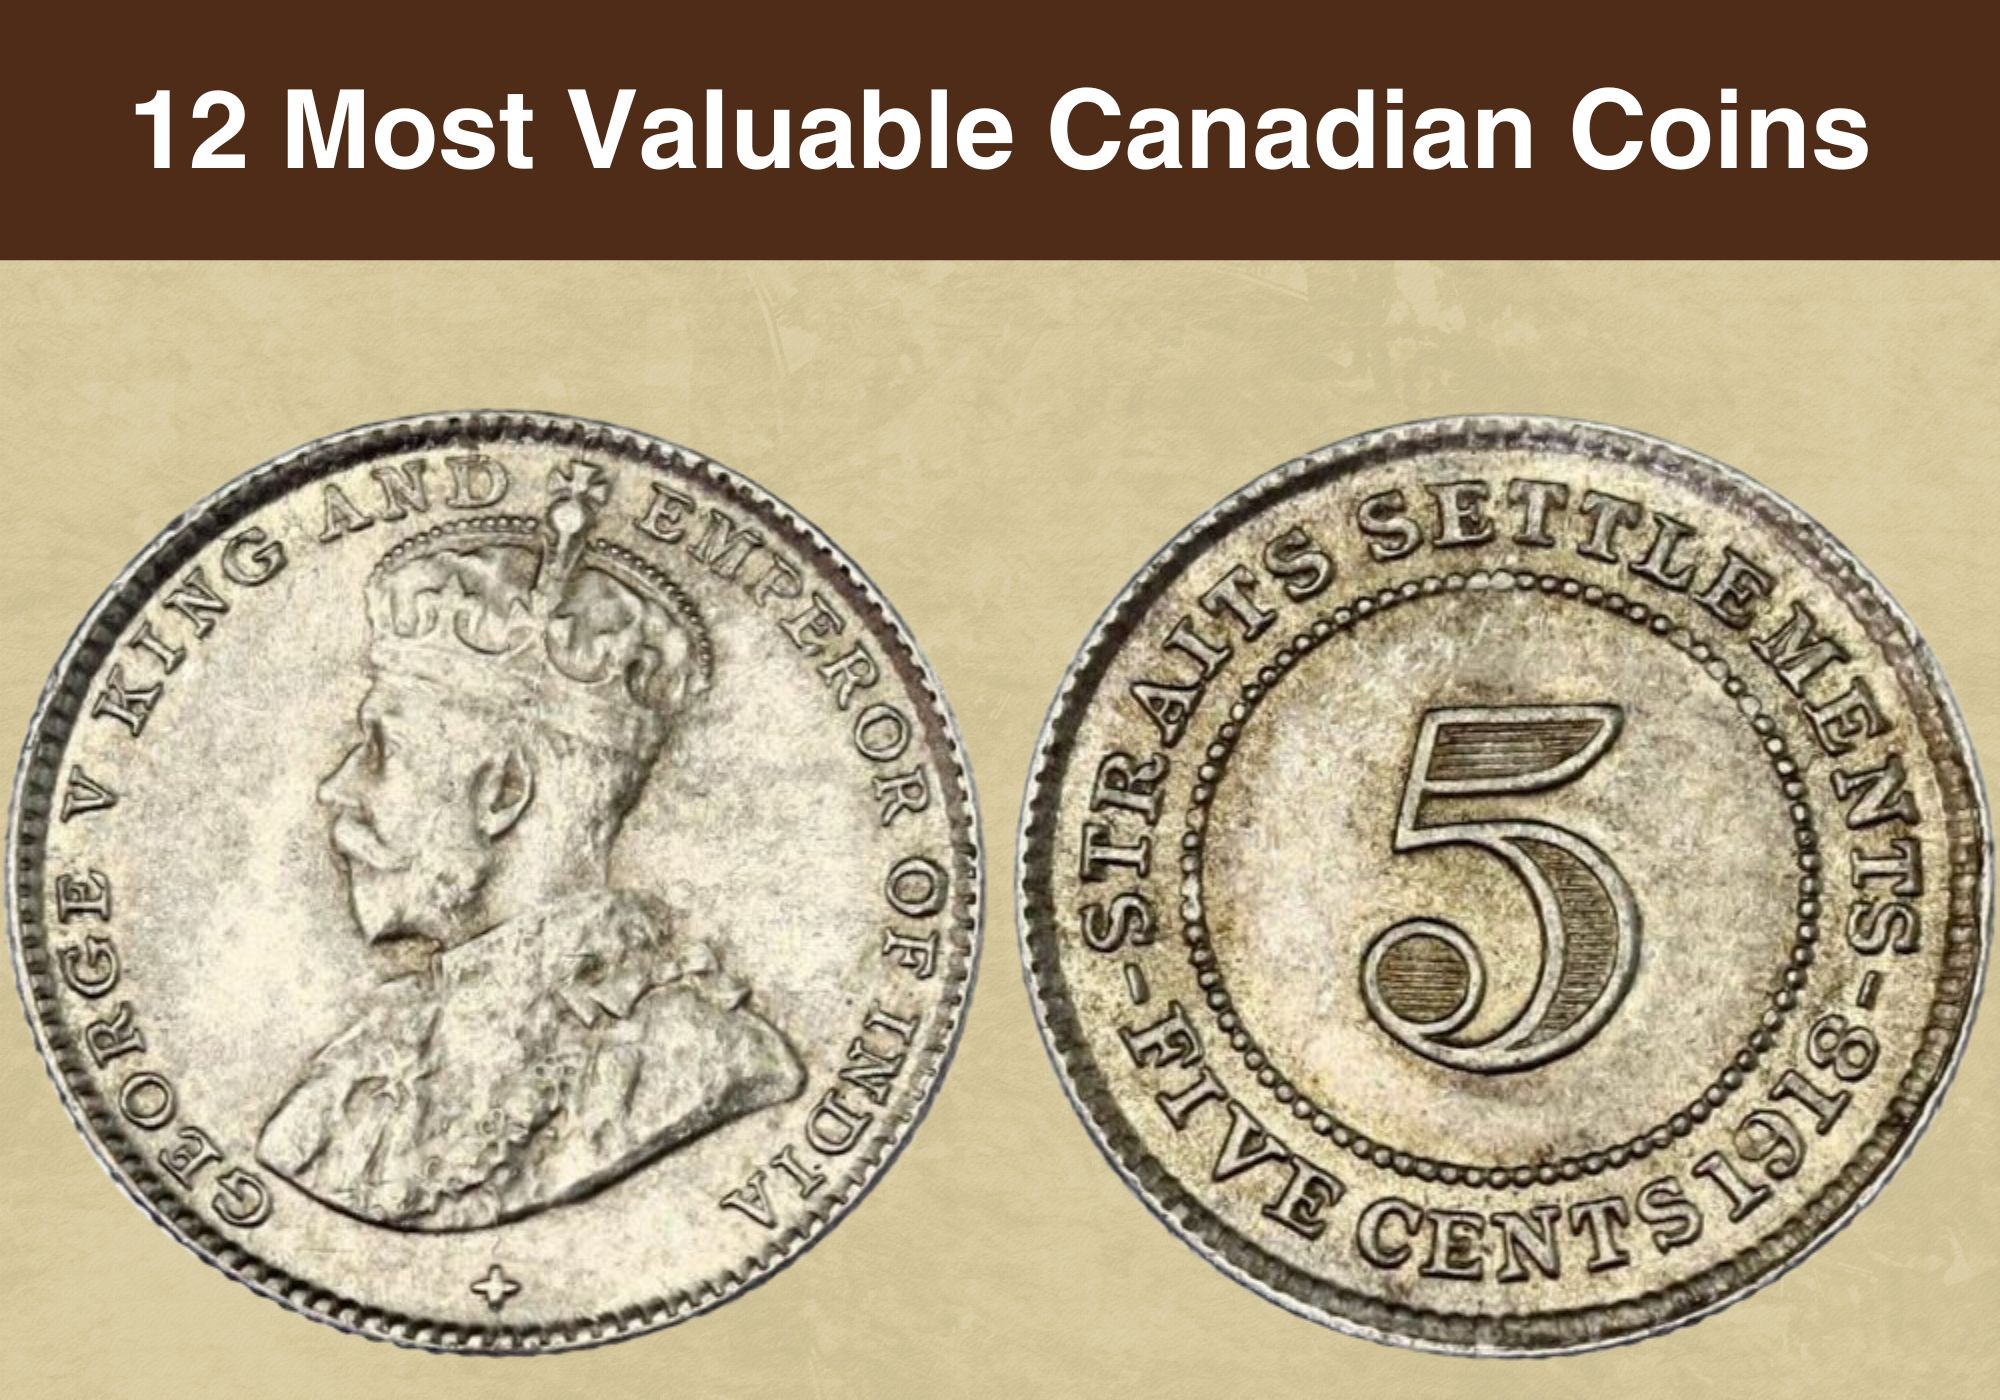 Queen Elizabeth II Coin Value: How Much is it Worth Today?